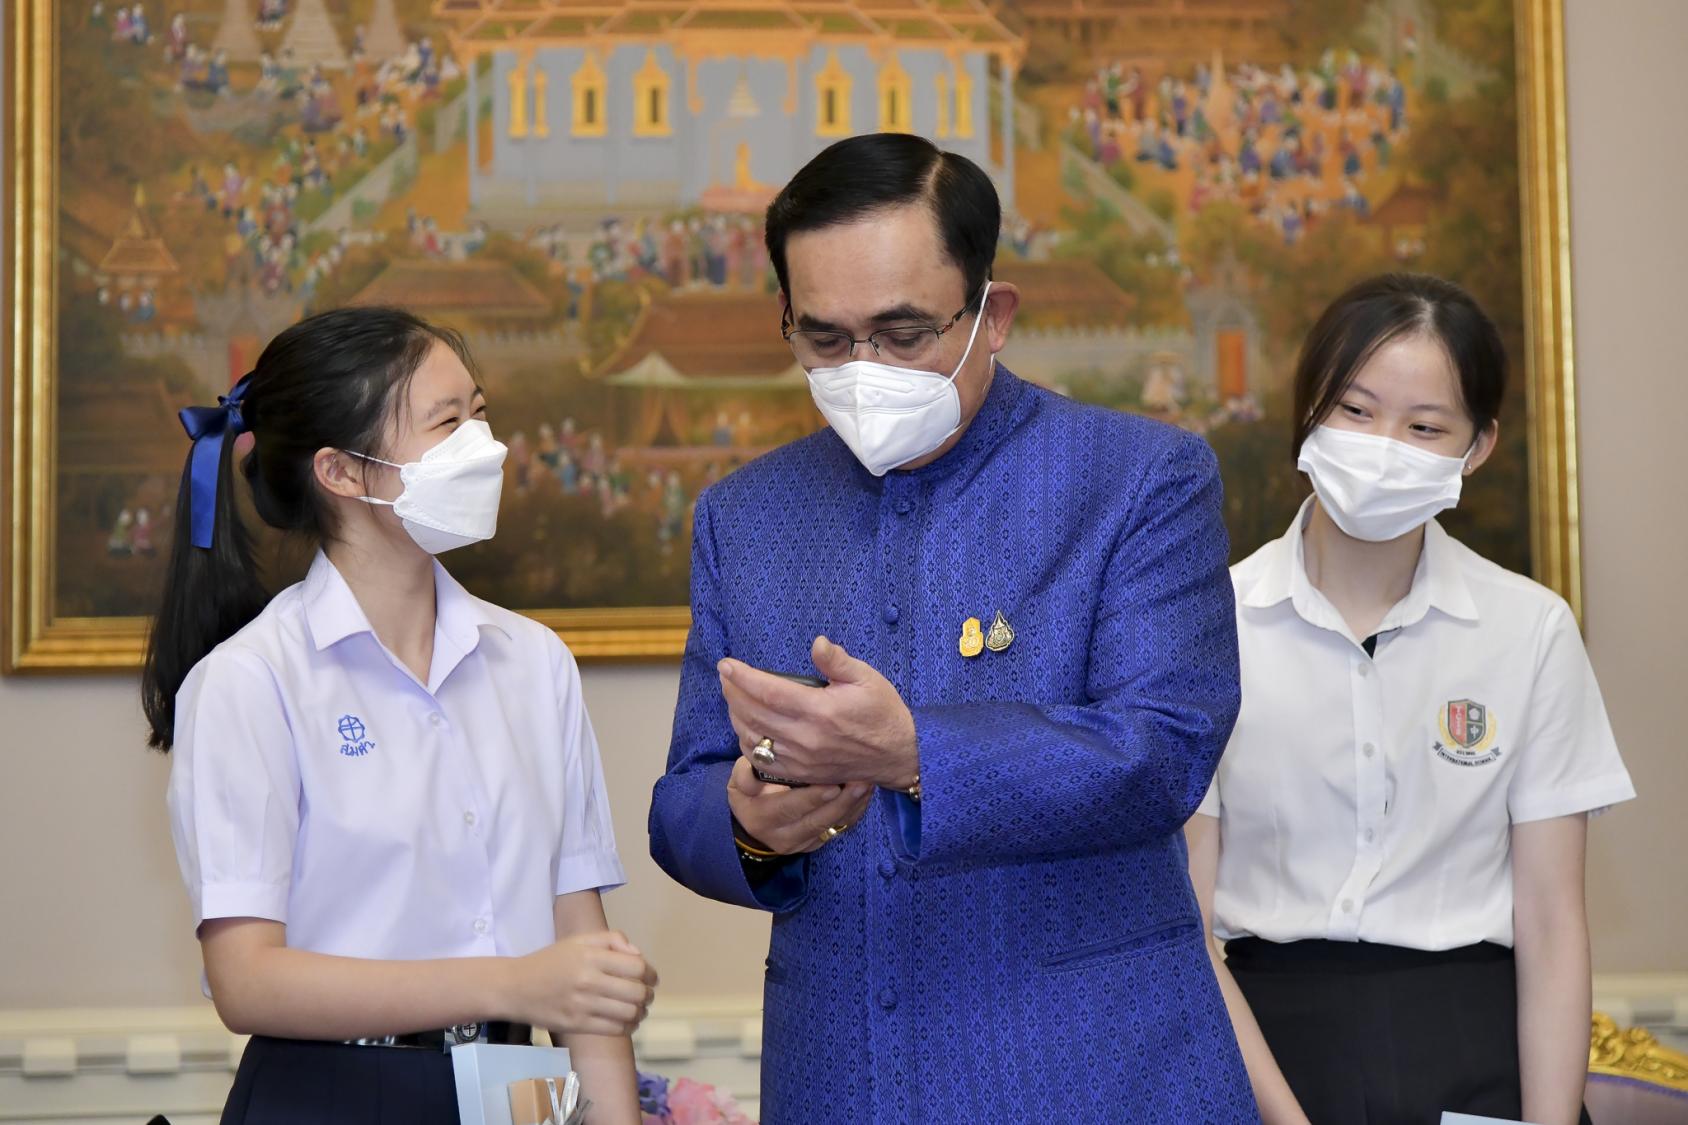 Thai youth climate leaders Aminta Permpoonwiwat, left, and Phatteeya Yongsanguanchai, meet with General Prayut Chan-o-cha, Prime Minister of Thailand, at the Government House.